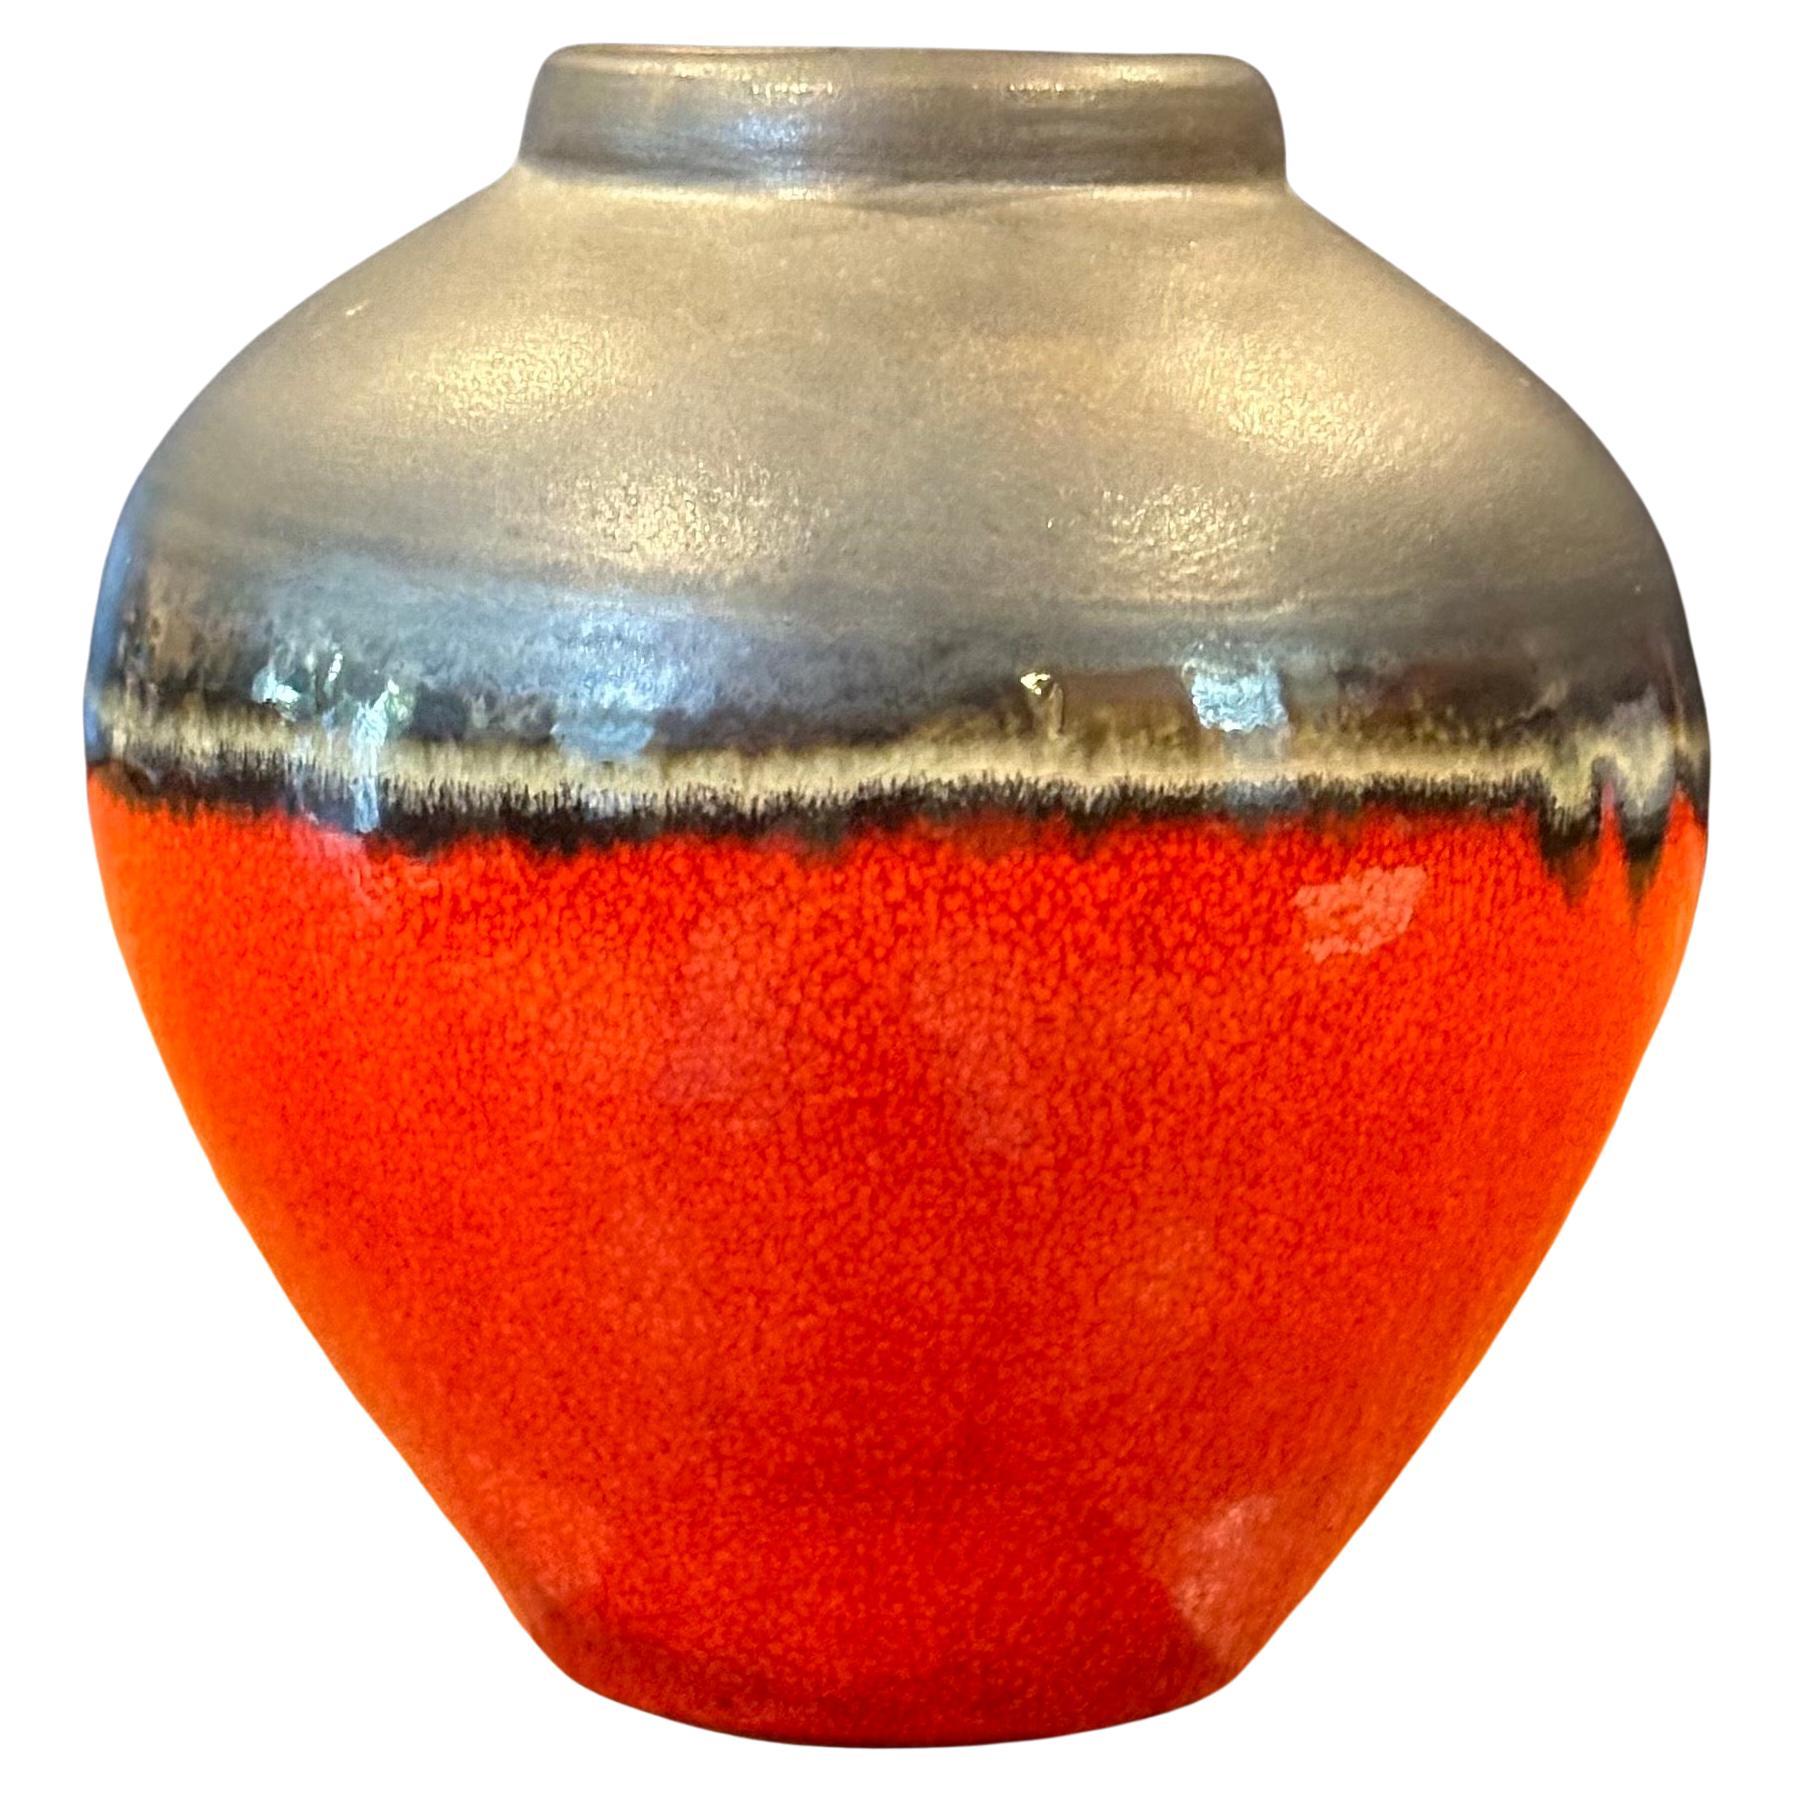 A great looking small red lava glazed vase, circa 1980s. The vase has a dark brown base with a bright red lava glaze and measures 4.25